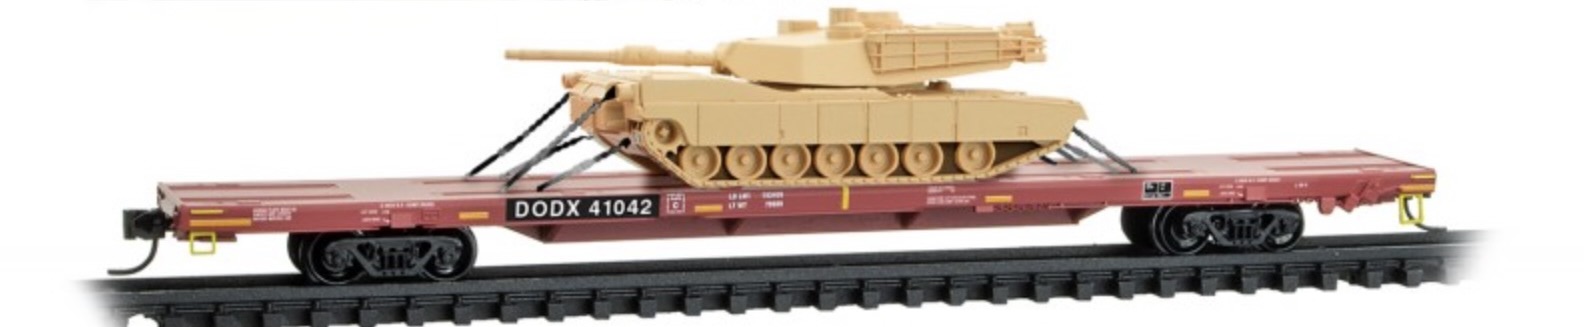 N Scale - Micro-Trains - 137 53 042 - Flatcar, 68 Foot, DODX Heavy-Duty - Department of Defense - 41042